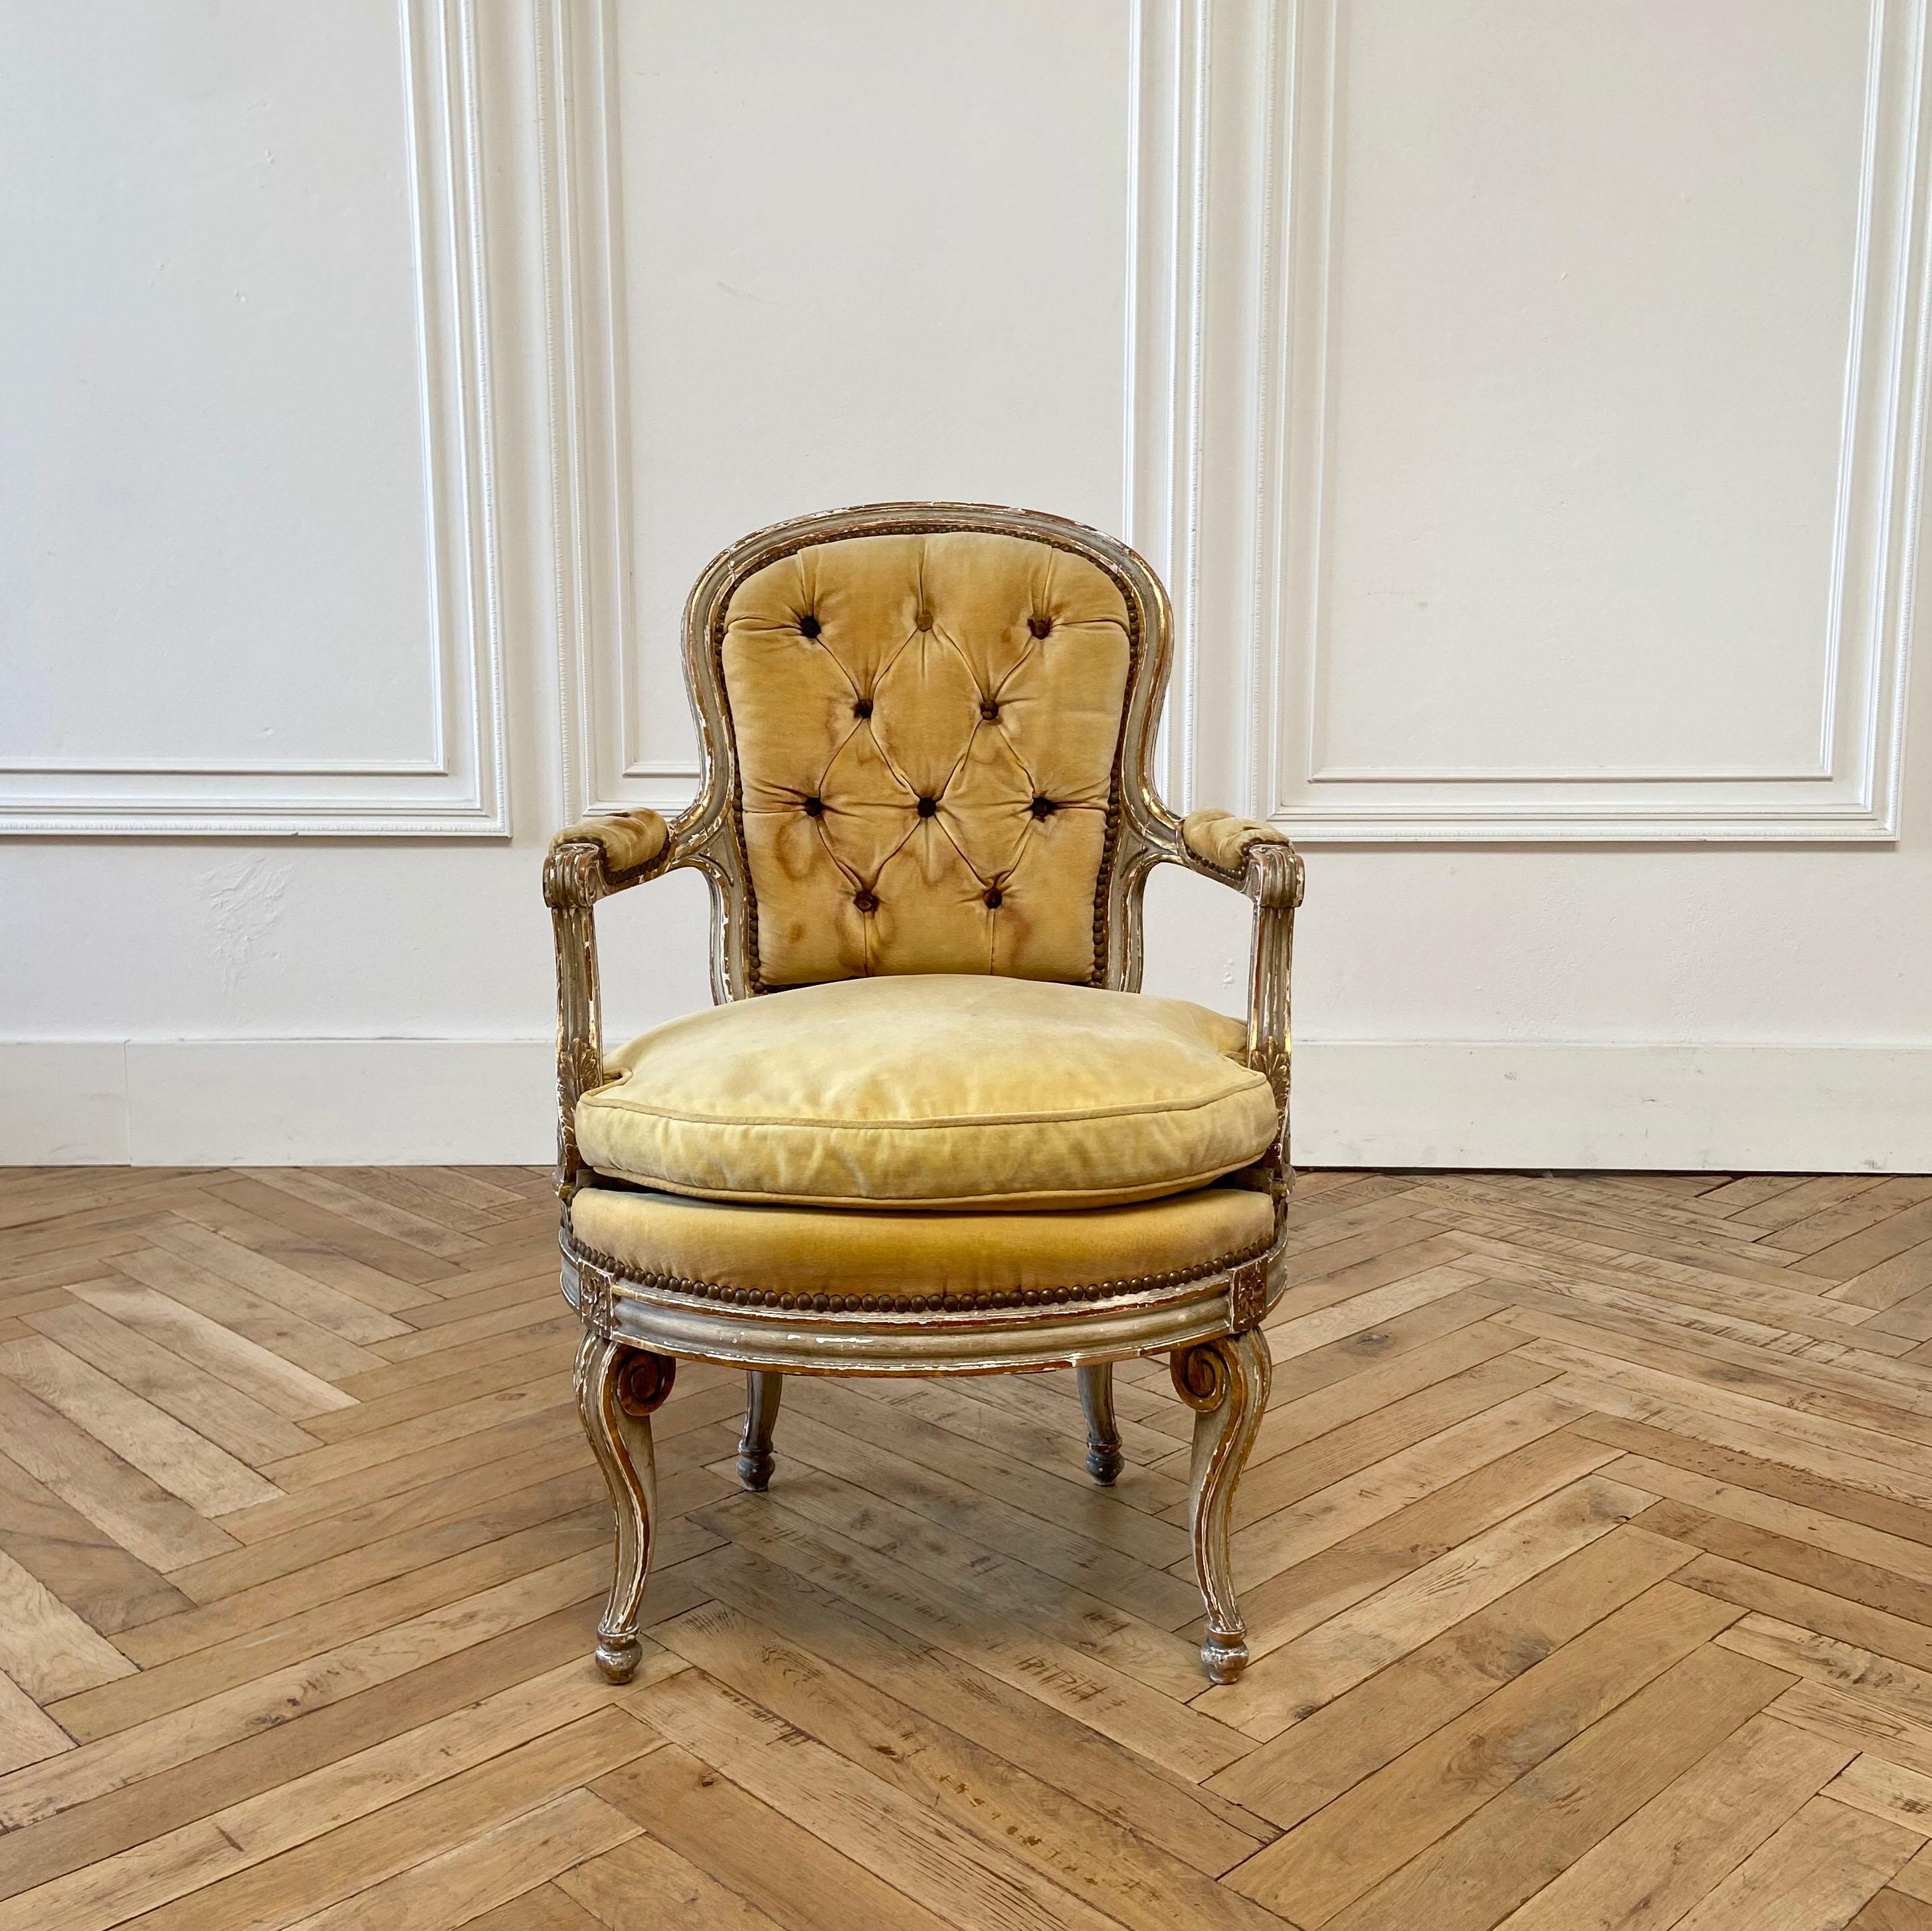 Antique French Provincial painted and upholstered open arm chair.
Louis XVI style chair
Size:
24” W x 24” D x 36” H
Seat height: 18”
Seat depth: 18”
Arm height: 24”

Painted in a Gustavian gray color, and mustard velvet upholstery.